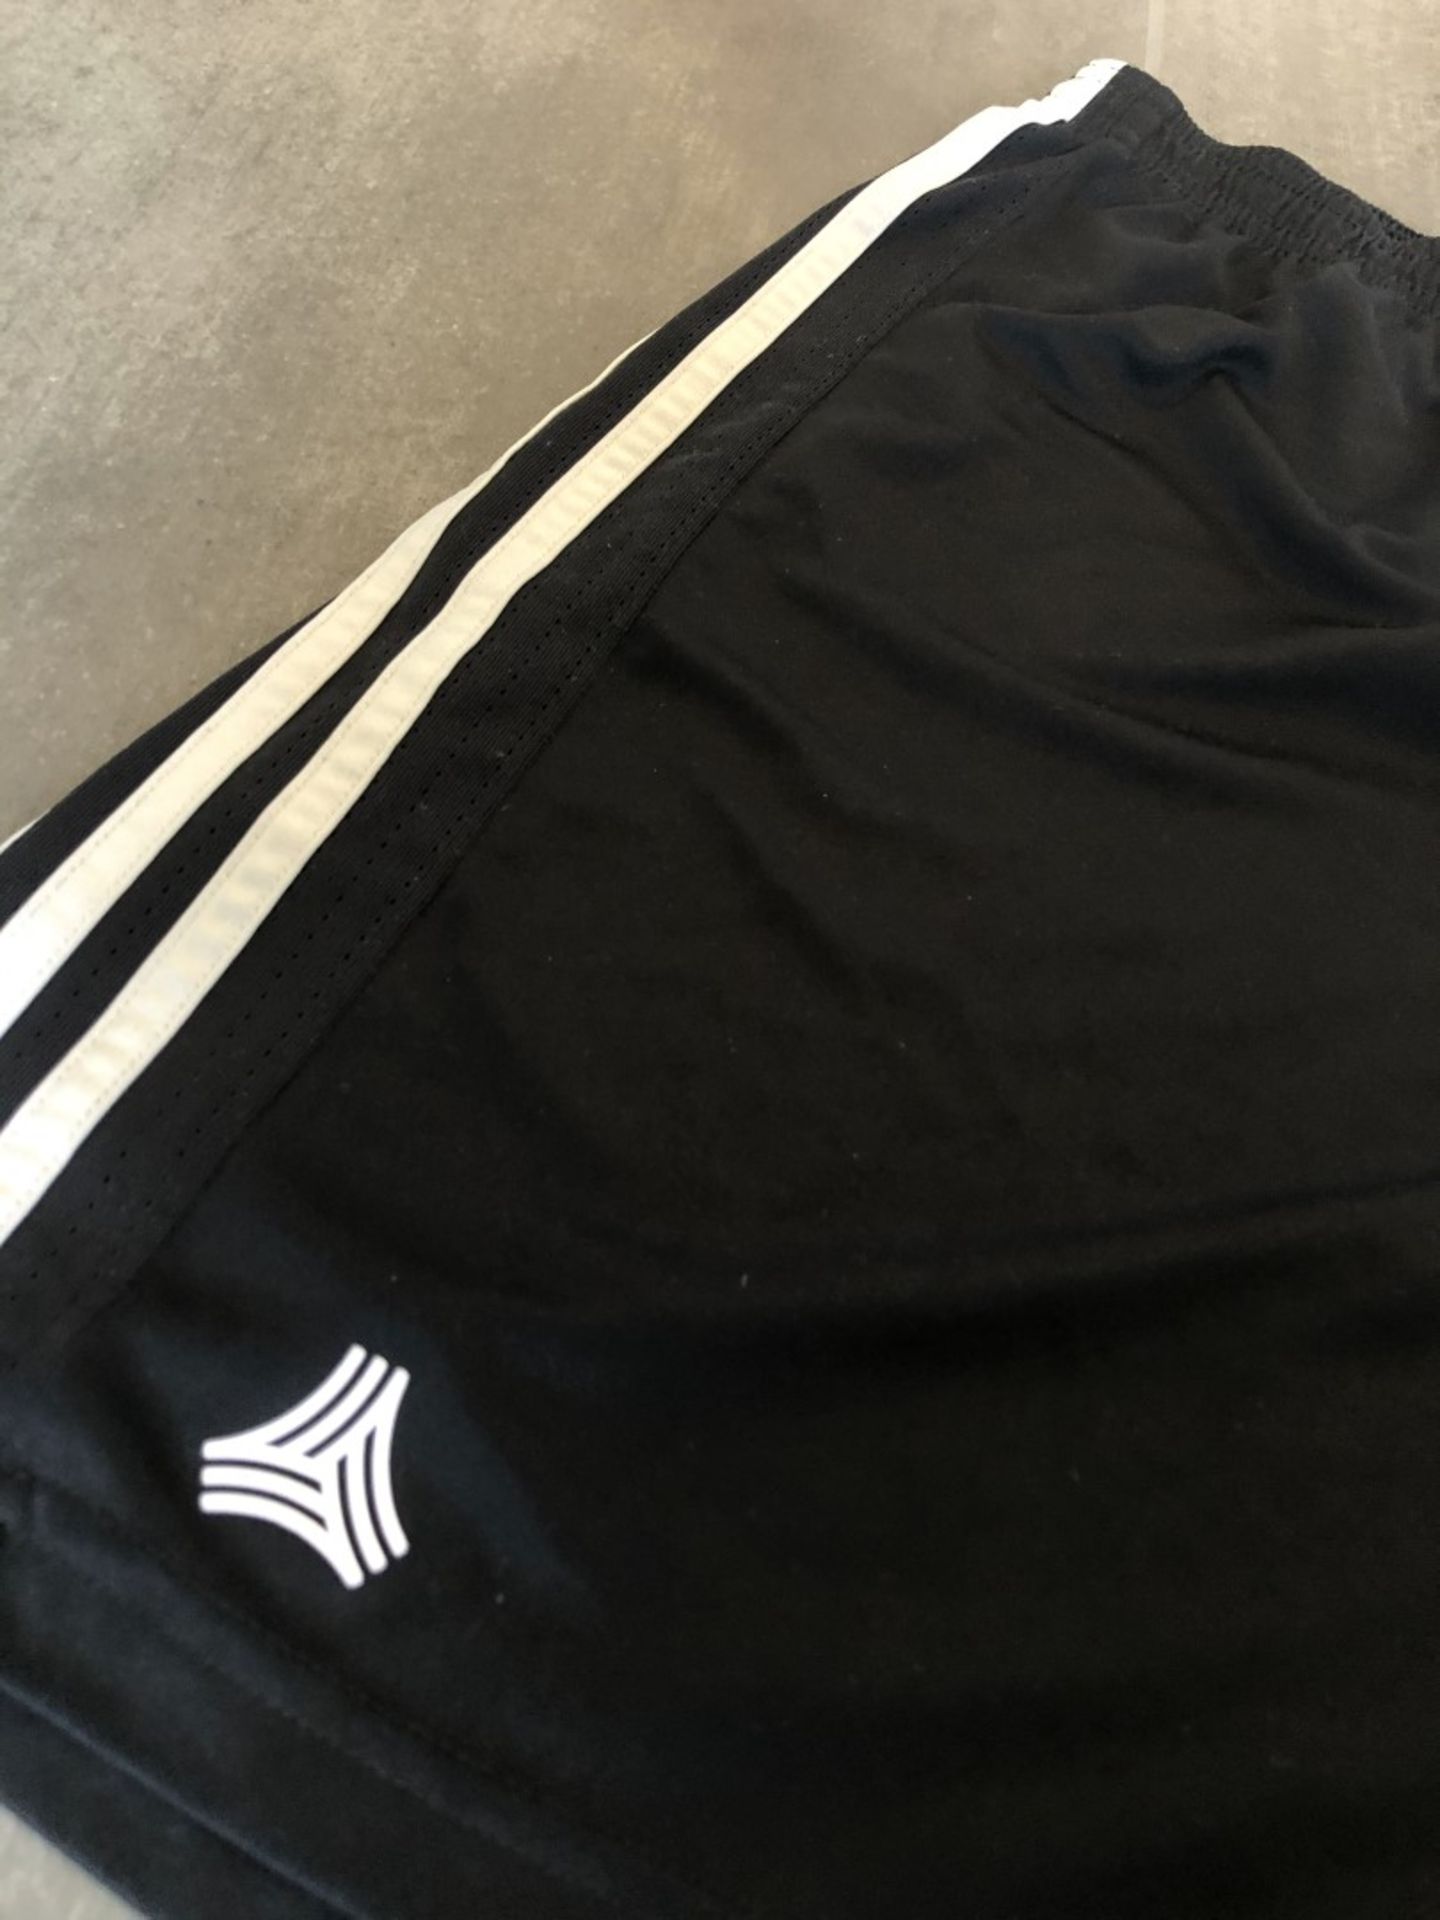 4 x Assorted Pairs Of Men's Genuine Adidas Shorts - AllIn Black - Sizes: L-XL - Preowned - Image 4 of 23